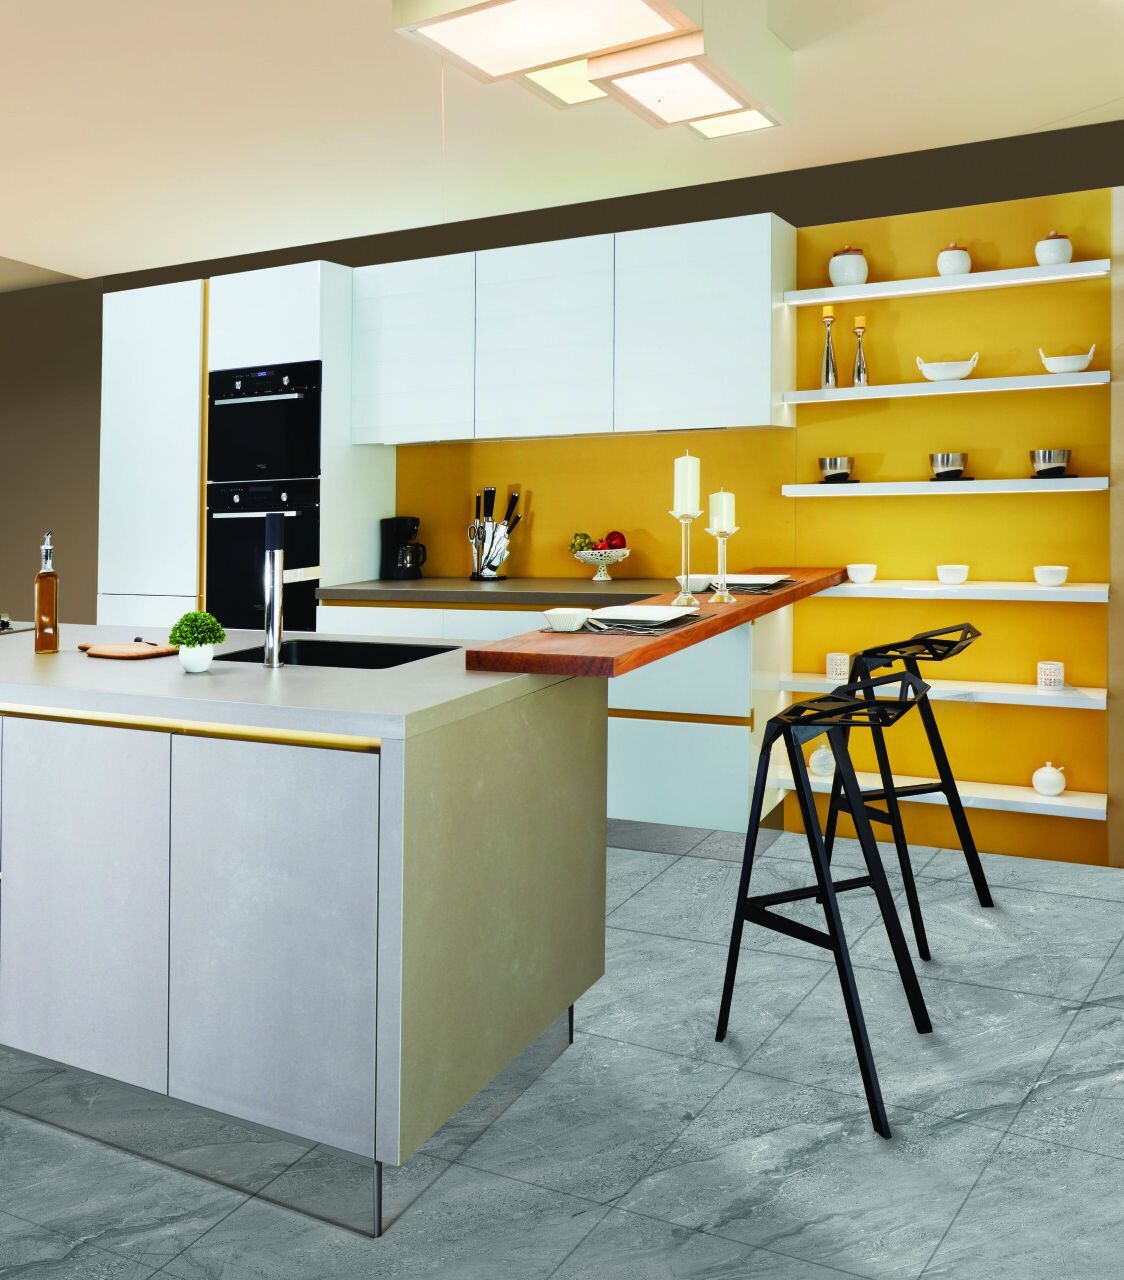 a kitchen with white cabinets and yellow walls:  Turn Your Crowded Kitchen Into A Minimalist Space